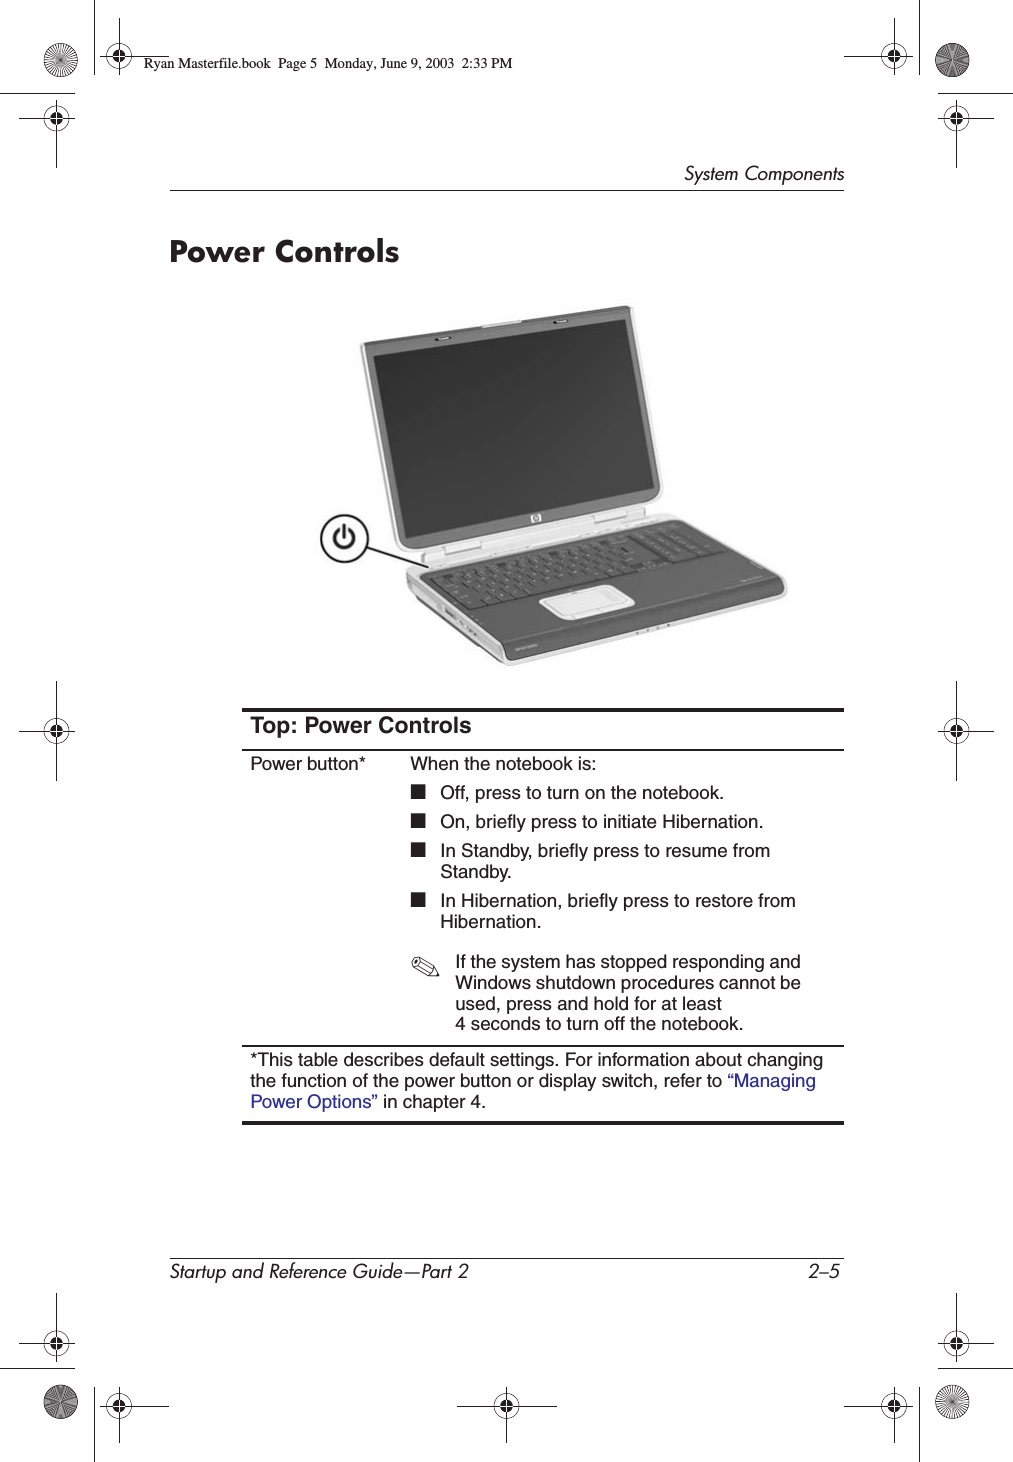 System ComponentsStartup and Reference Guide—Part 2 2–5Power ControlsTop: Power ControlsPower button* When the notebook is:■Off, press to turn on the notebook.■On, briefly press to initiate Hibernation.■In Standby, briefly press to resume from Standby.■In Hibernation, briefly press to restore from Hibernation.✎If the system has stopped responding and Windows shutdown procedures cannot be used, press and hold for at least 4 seconds to turn off the notebook.*This table describes default settings. For information about changing the function of the power button or display switch, refer to “ManagingPower Options” in chapter 4.Ryan Masterfile.book  Page 5  Monday, June 9, 2003  2:33 PM